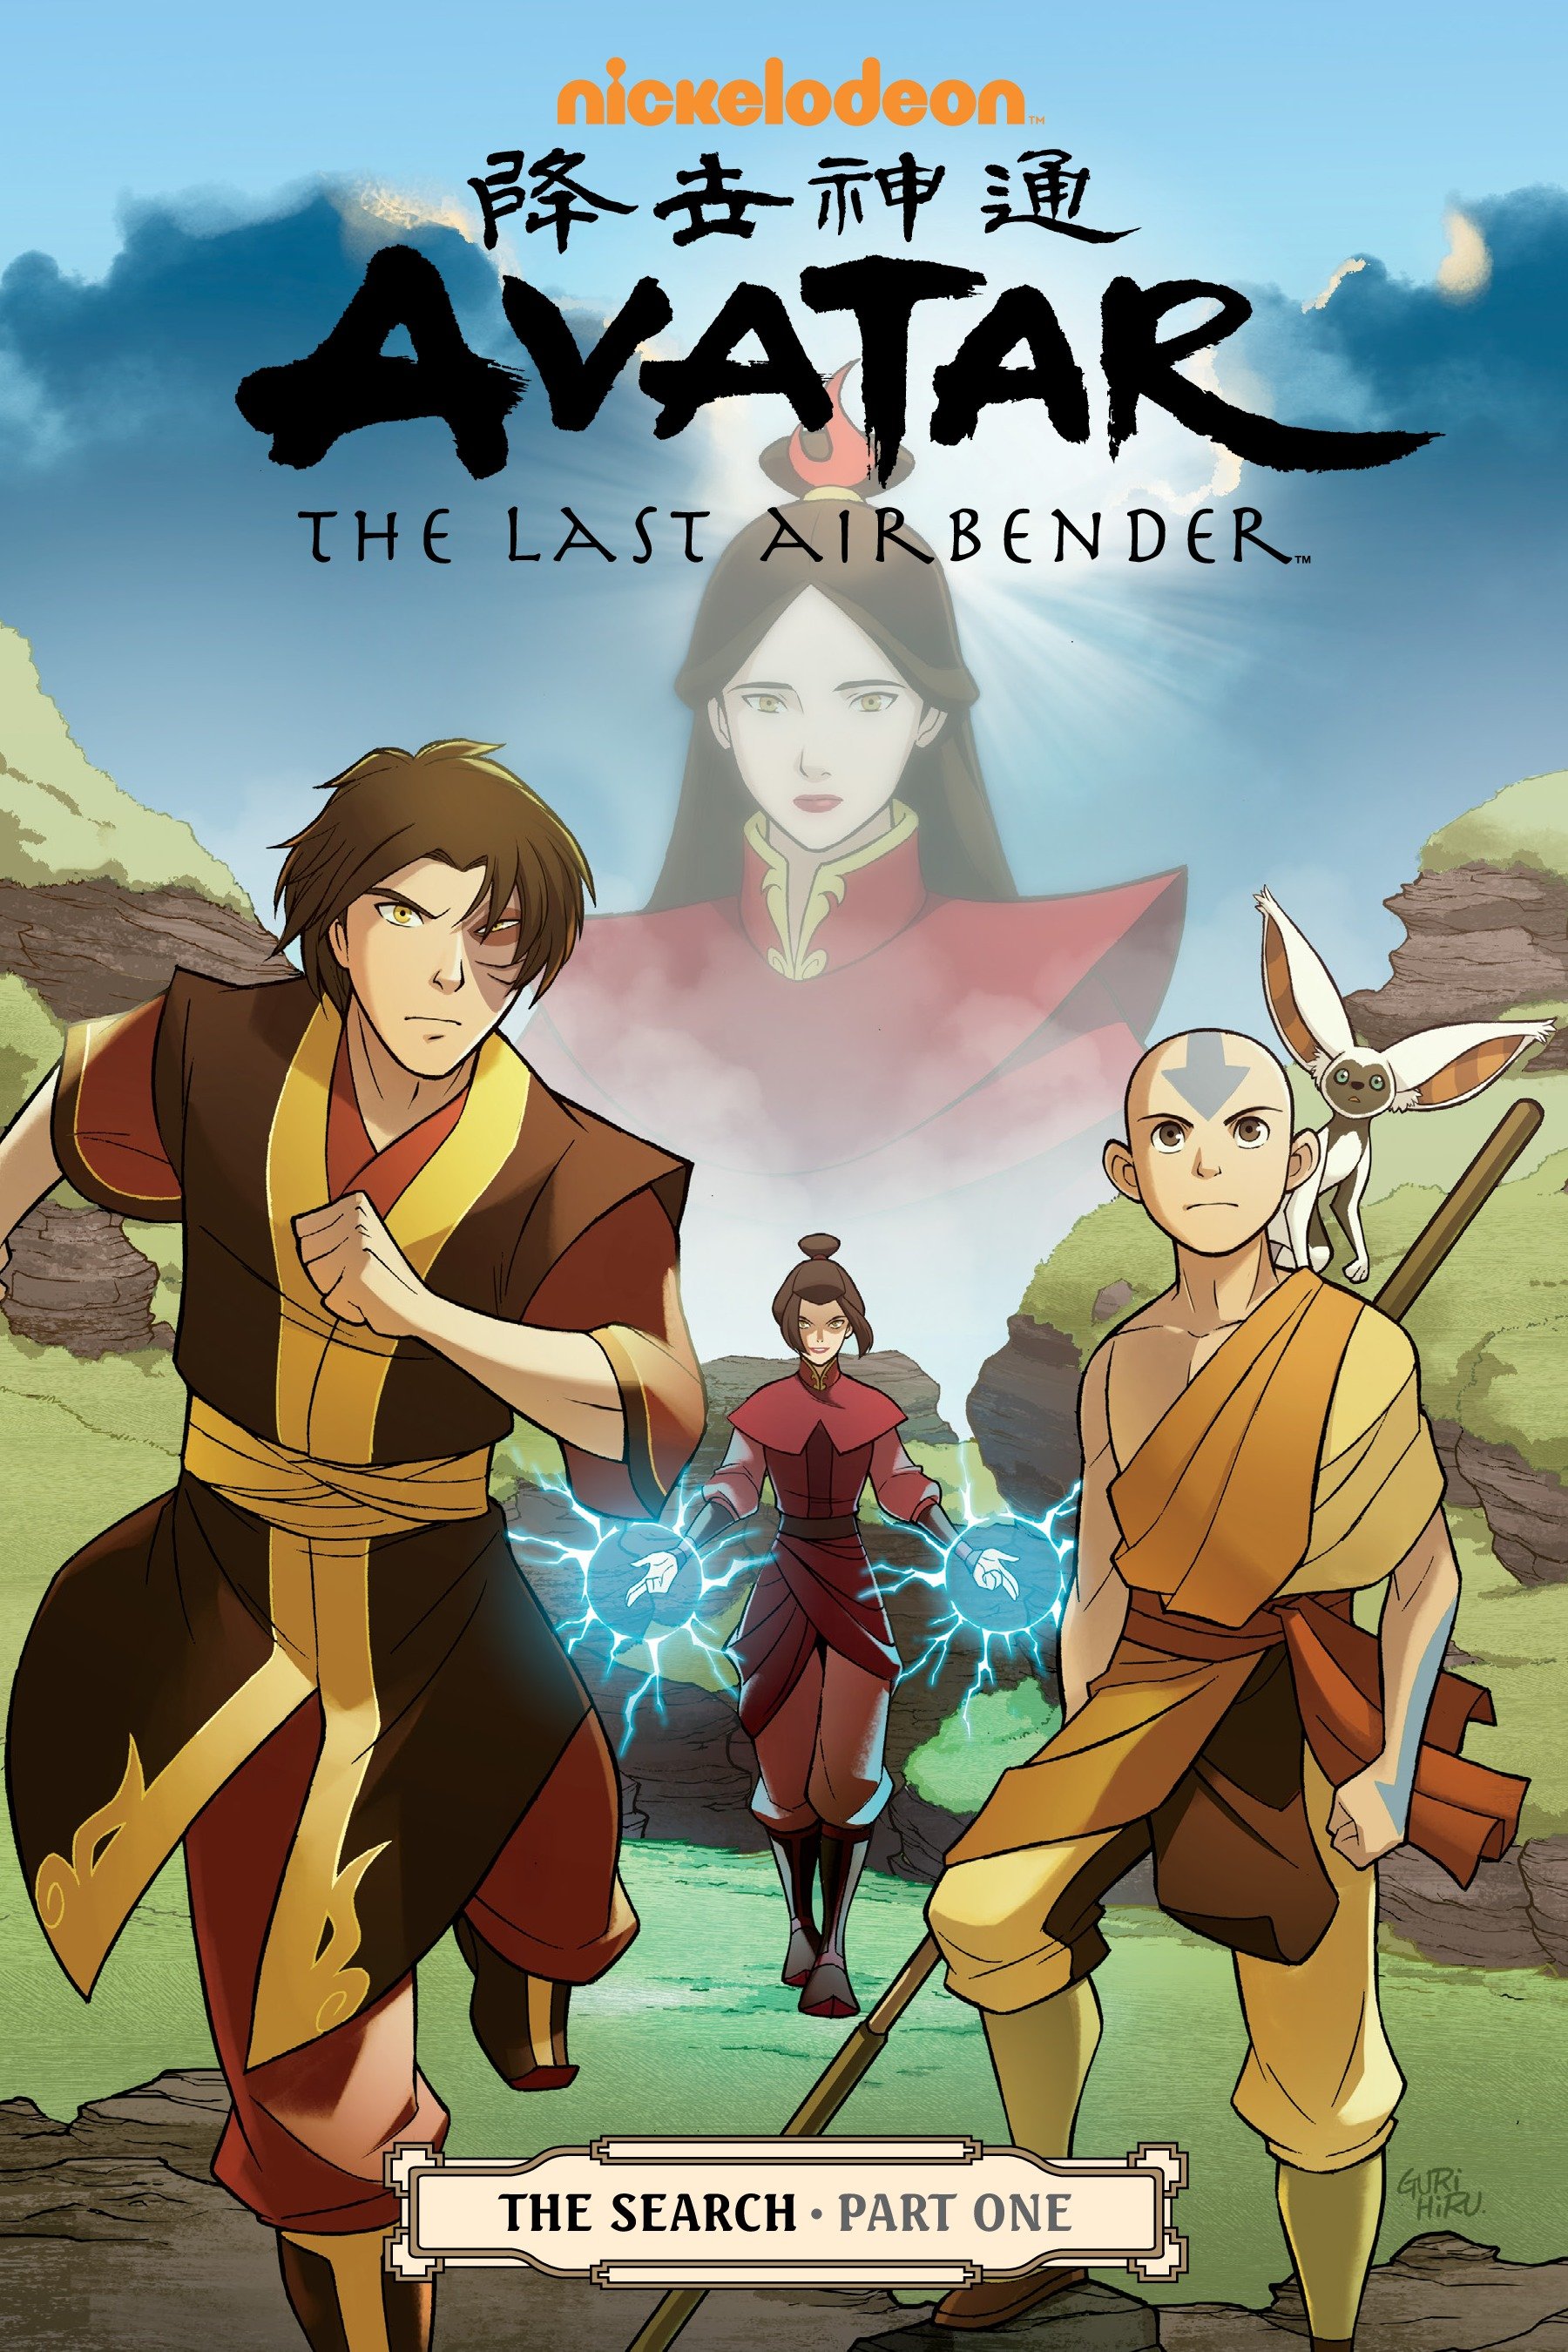 Avatar: The Last Airbender: Avatar: The Last Airbender - The Search Part 1 (Paperback) - image 1 of 1